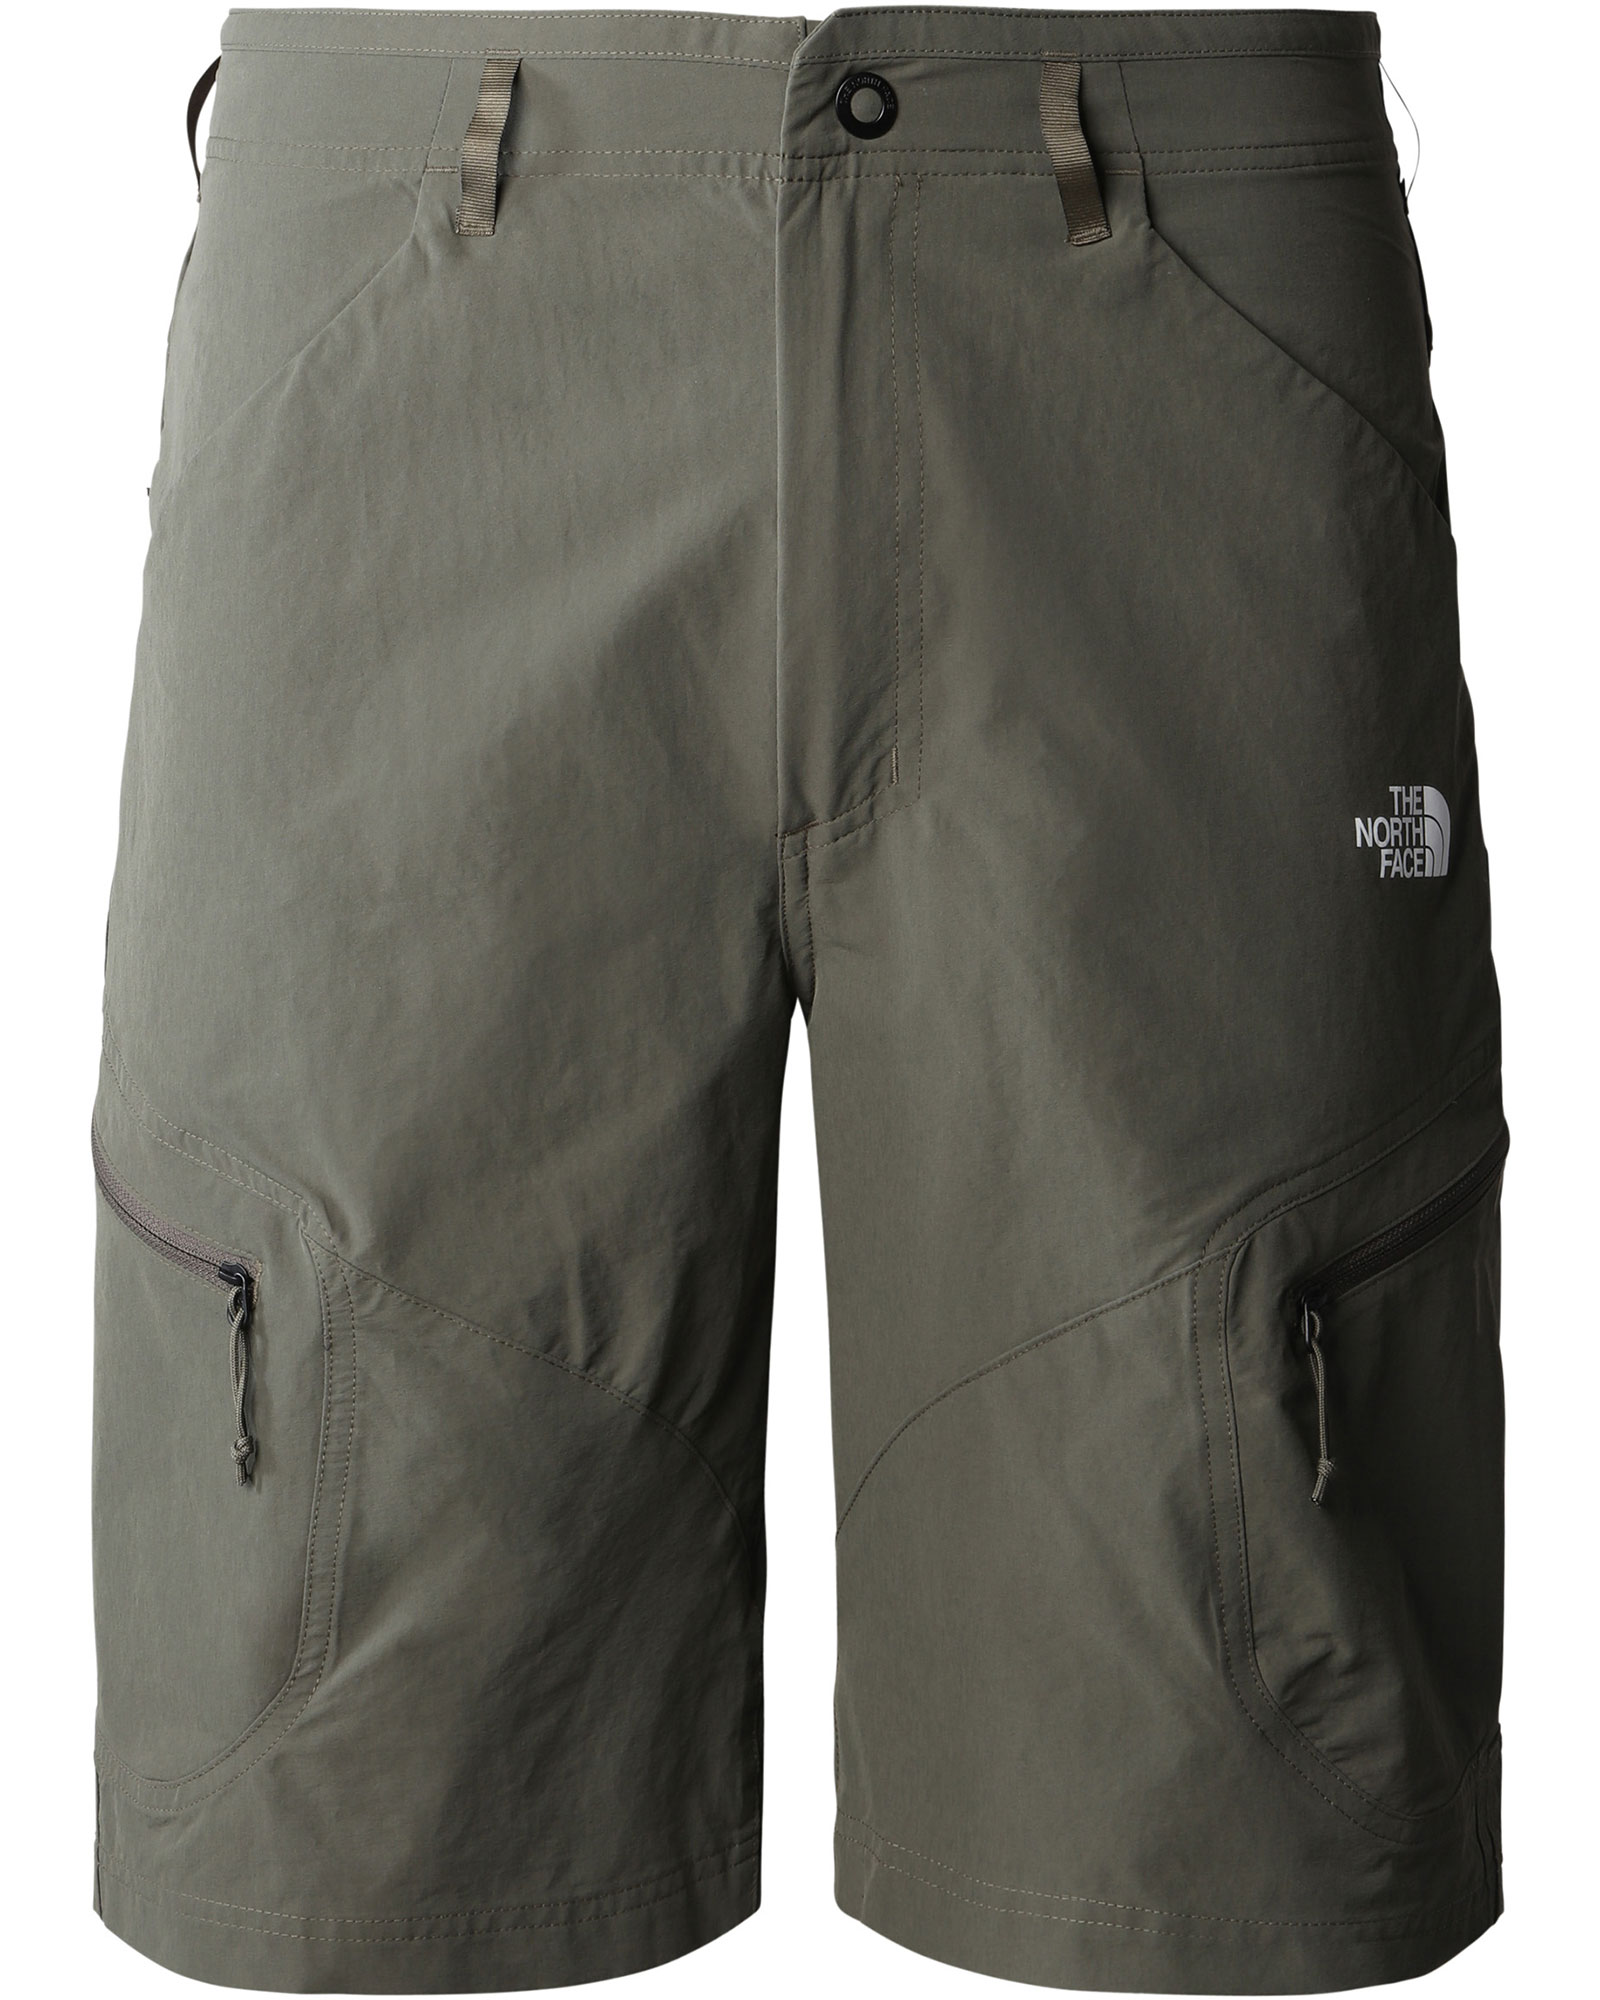 The North Face Men’s Exploration Shorts - New Taupe Green EU 30